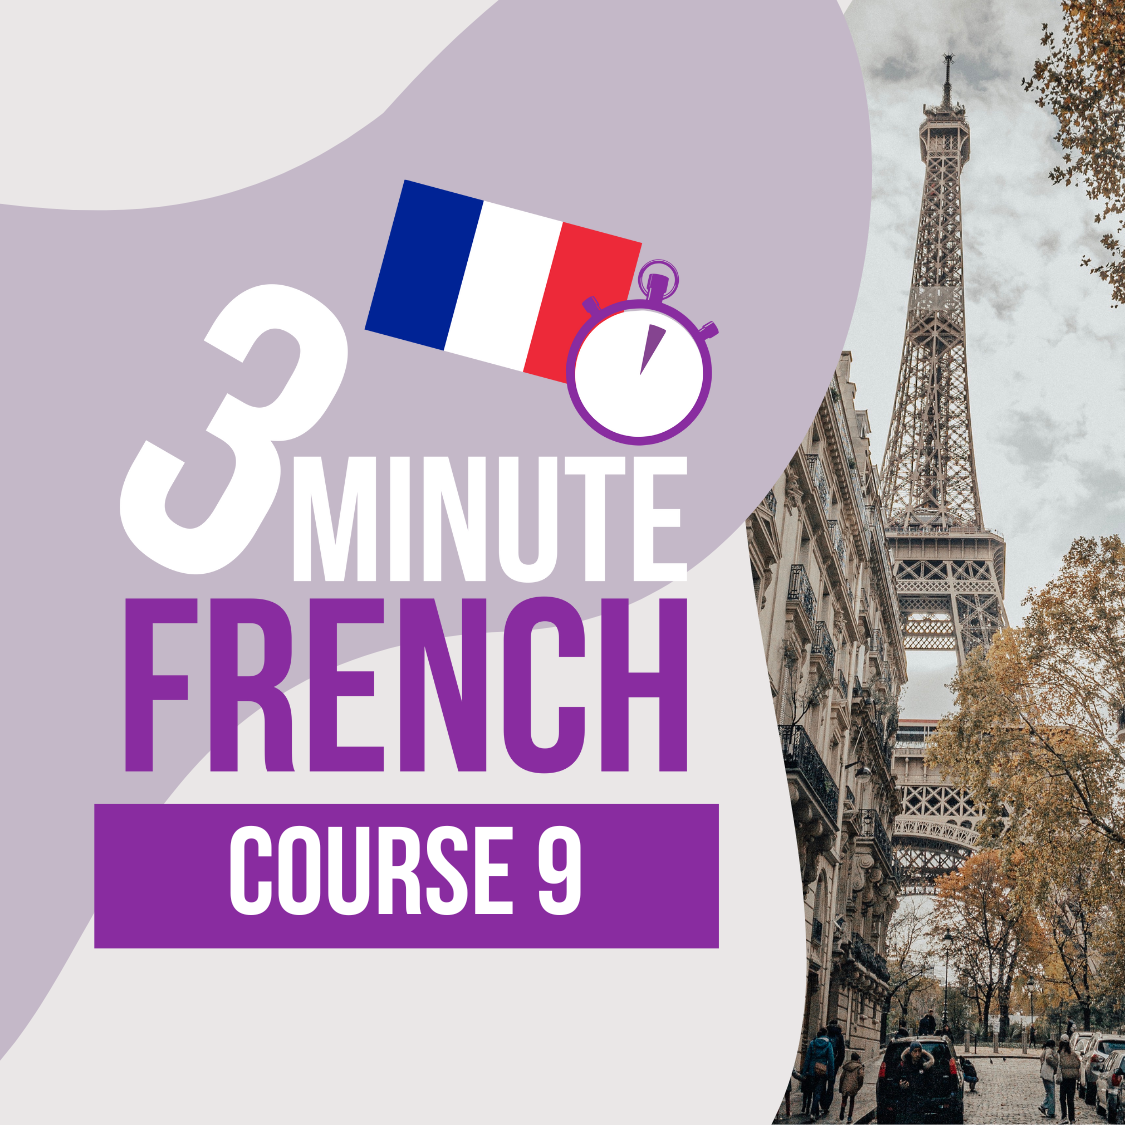 3 Minute French - Course 9